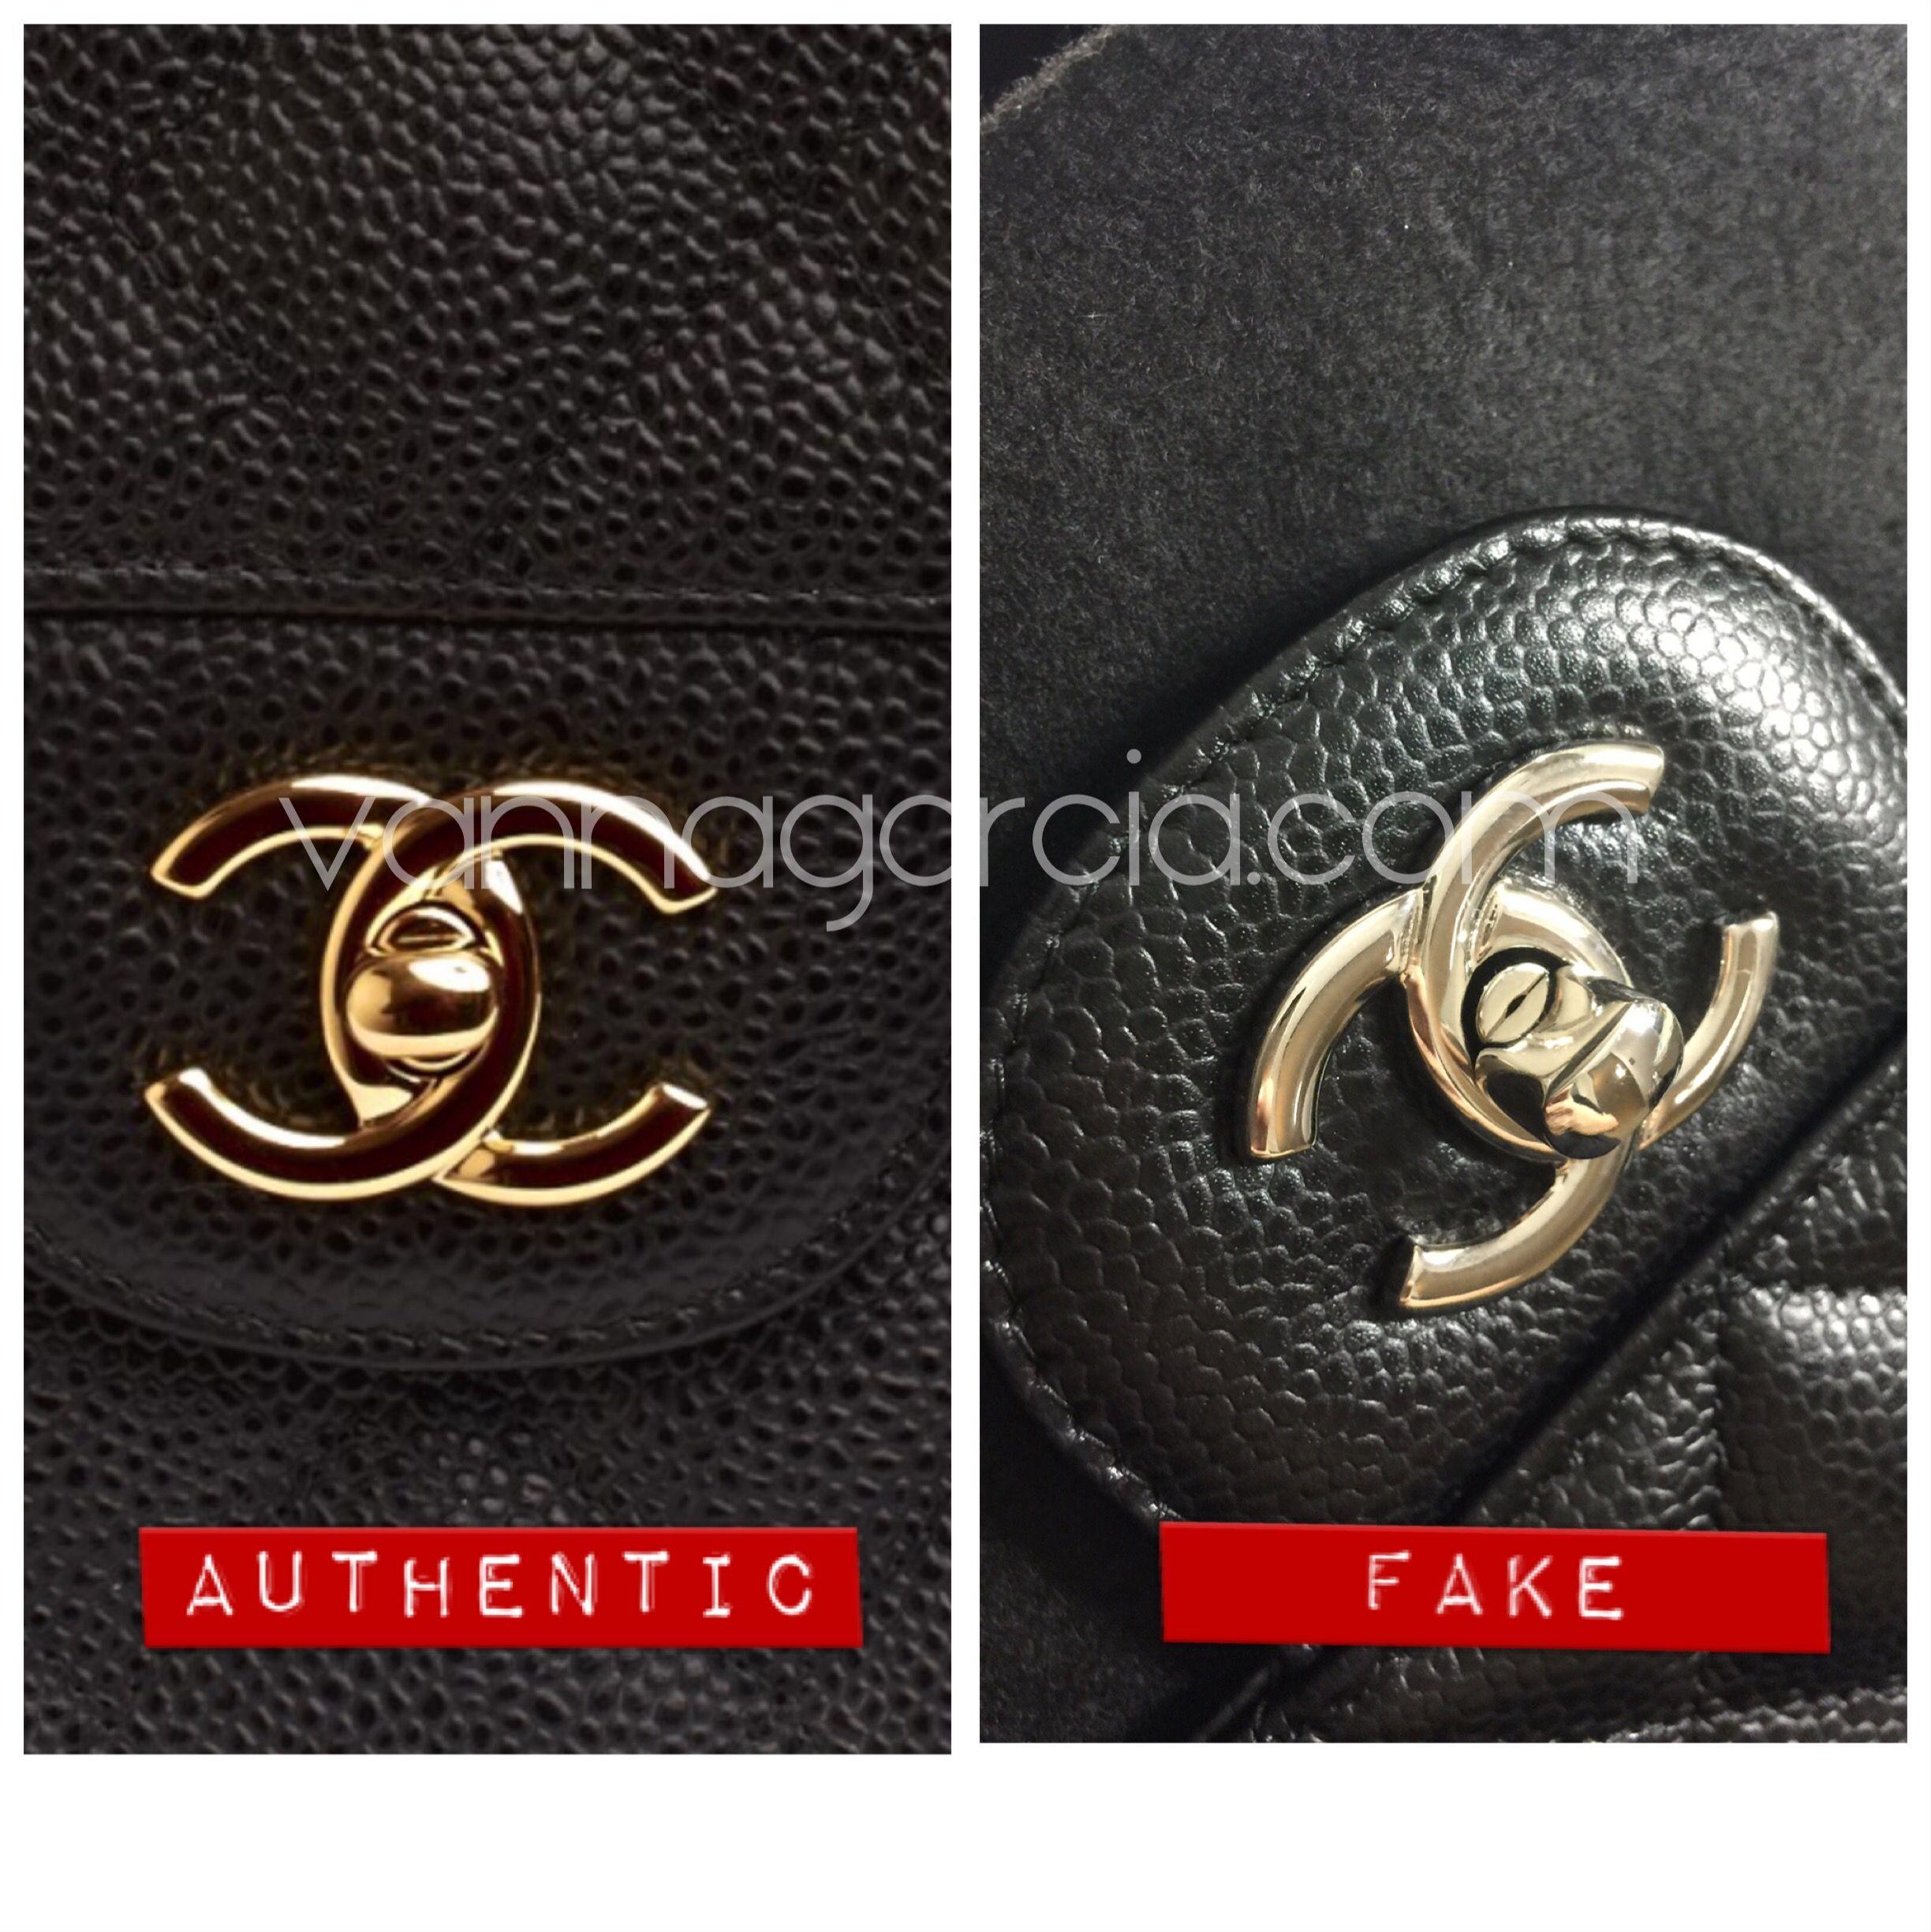 Fake Chanel Logo - Some Tips to Find out Authenticity of Chanel Bags